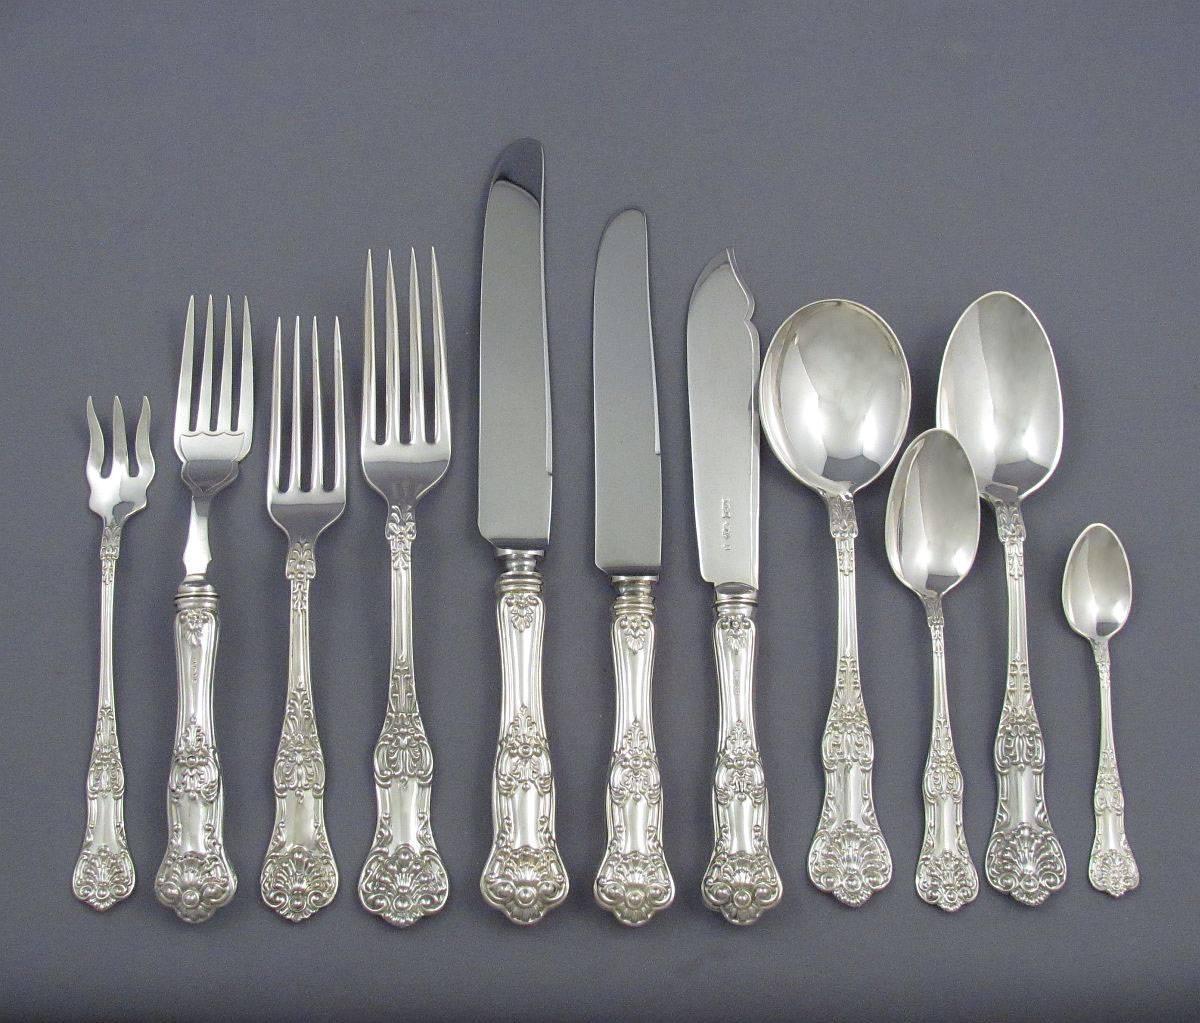 An extensive Queens pattern sterling silver flatware service for twelve by Roden Brothers, Toronto, circa 1920, comprising:

12 dinner knives
12 dinner forks
12 luncheon knives
12 luncheon forks
12 fish knives
12 fish forks
12 seafood